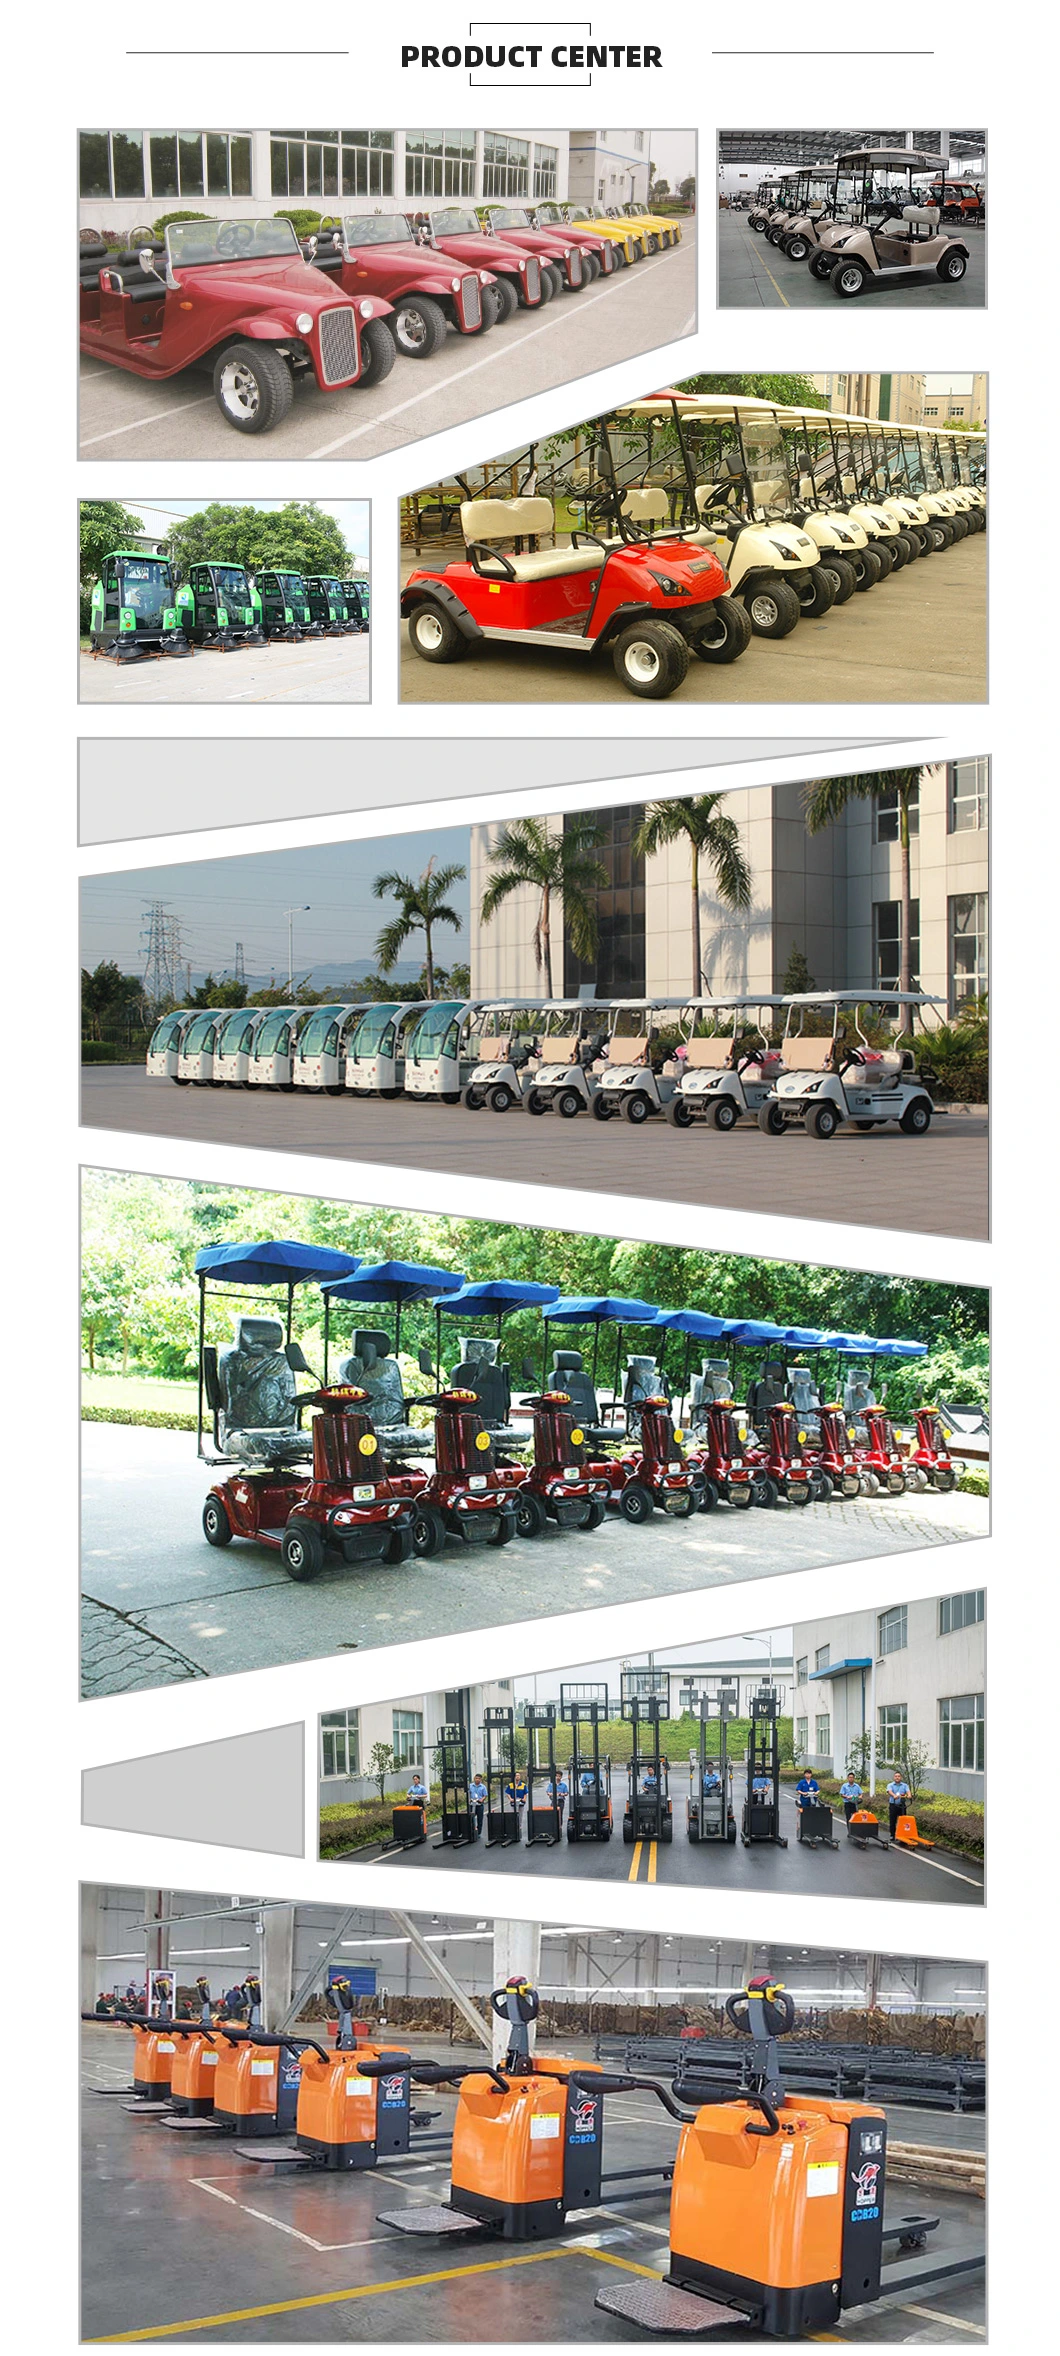 China Manufacturer Seller New Design 4 Wheel Handicapped Electric Mobility Scooter for Old People (DL24800-1)